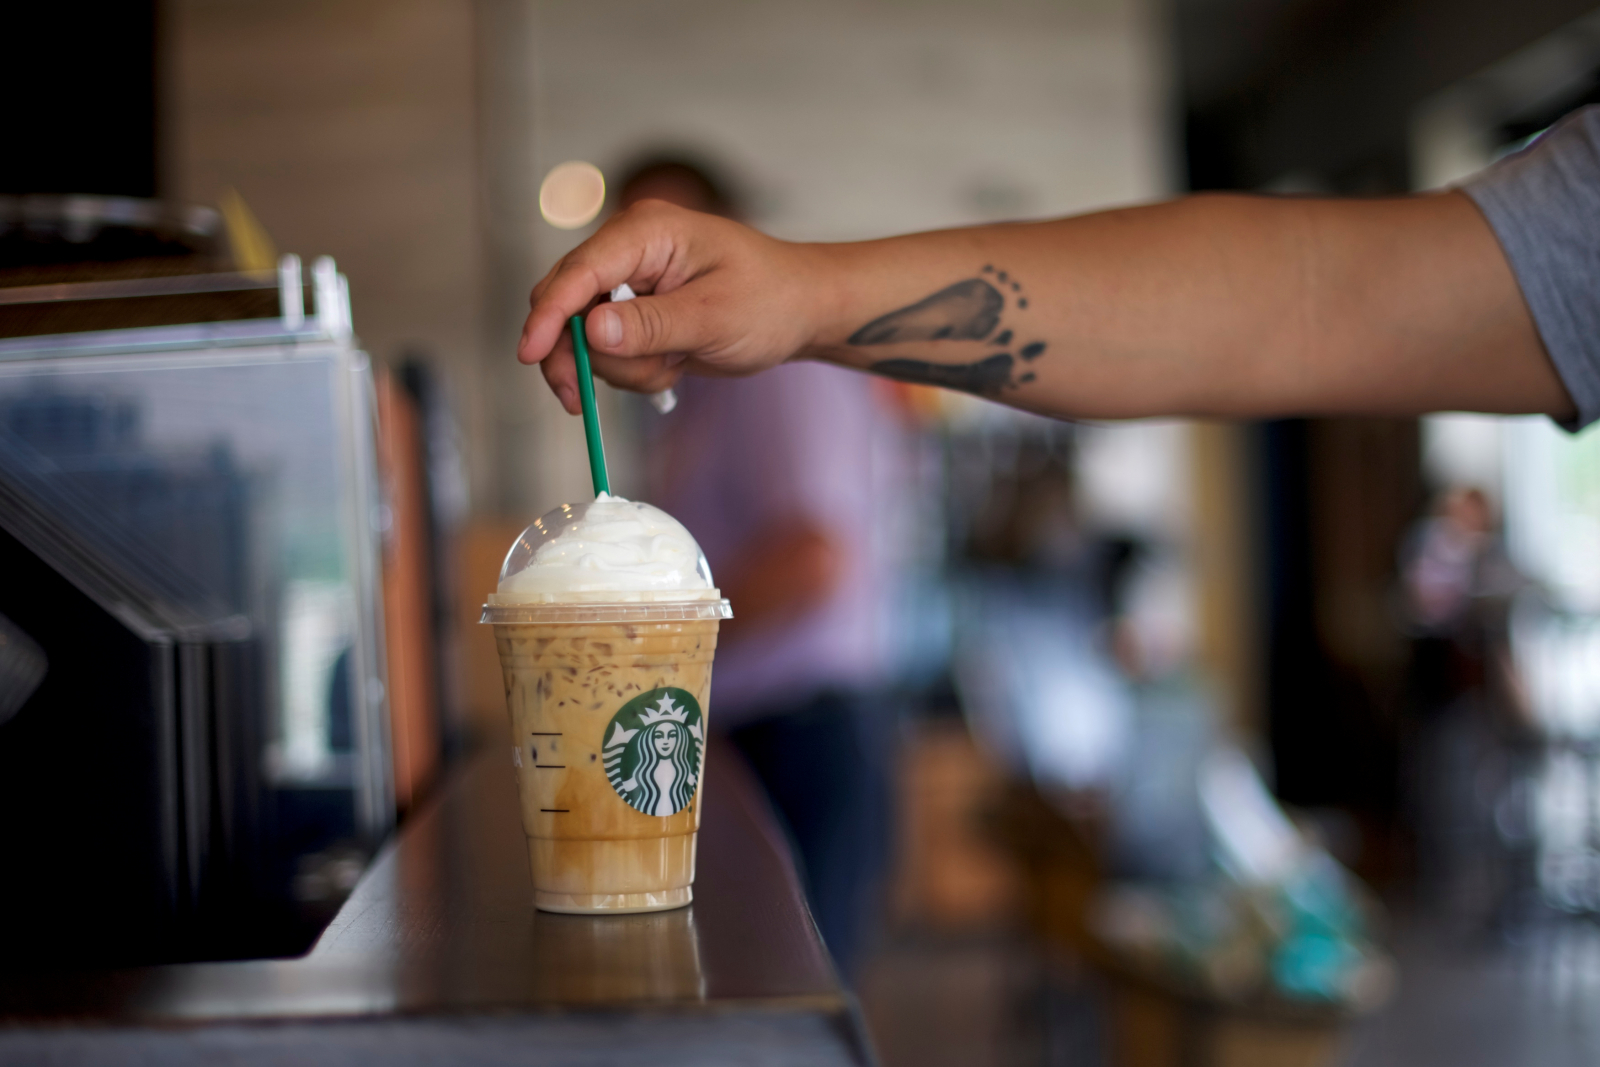 Starbucks Replaces Straws With Sippy Cup Lid